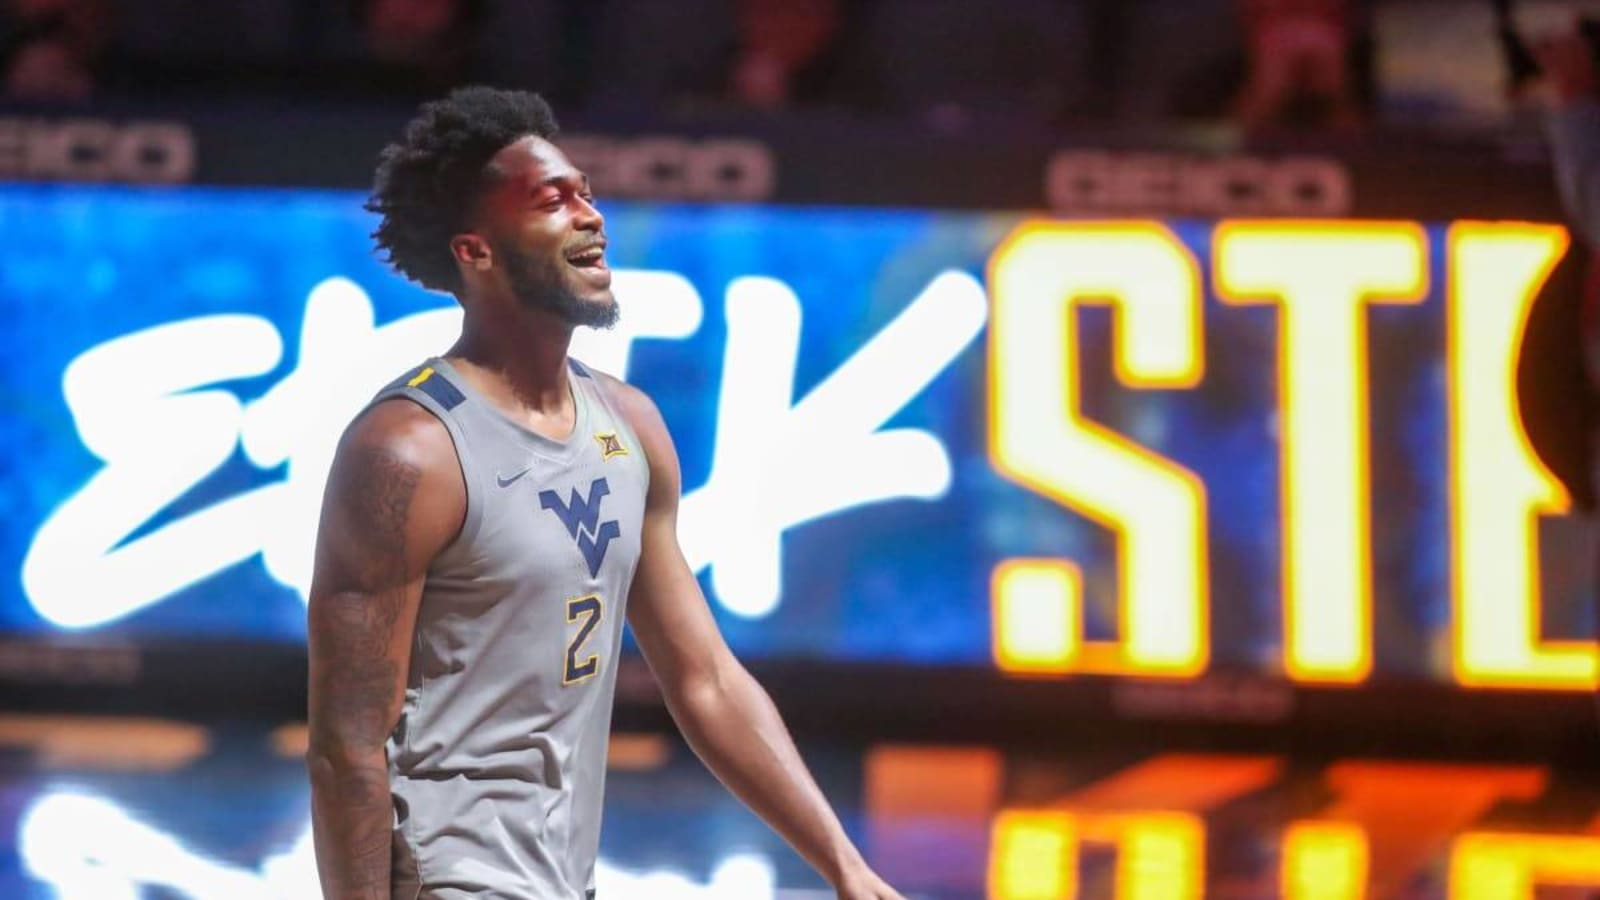 Eilert Reveals Two New Members of WVU&#39;s Starting Five